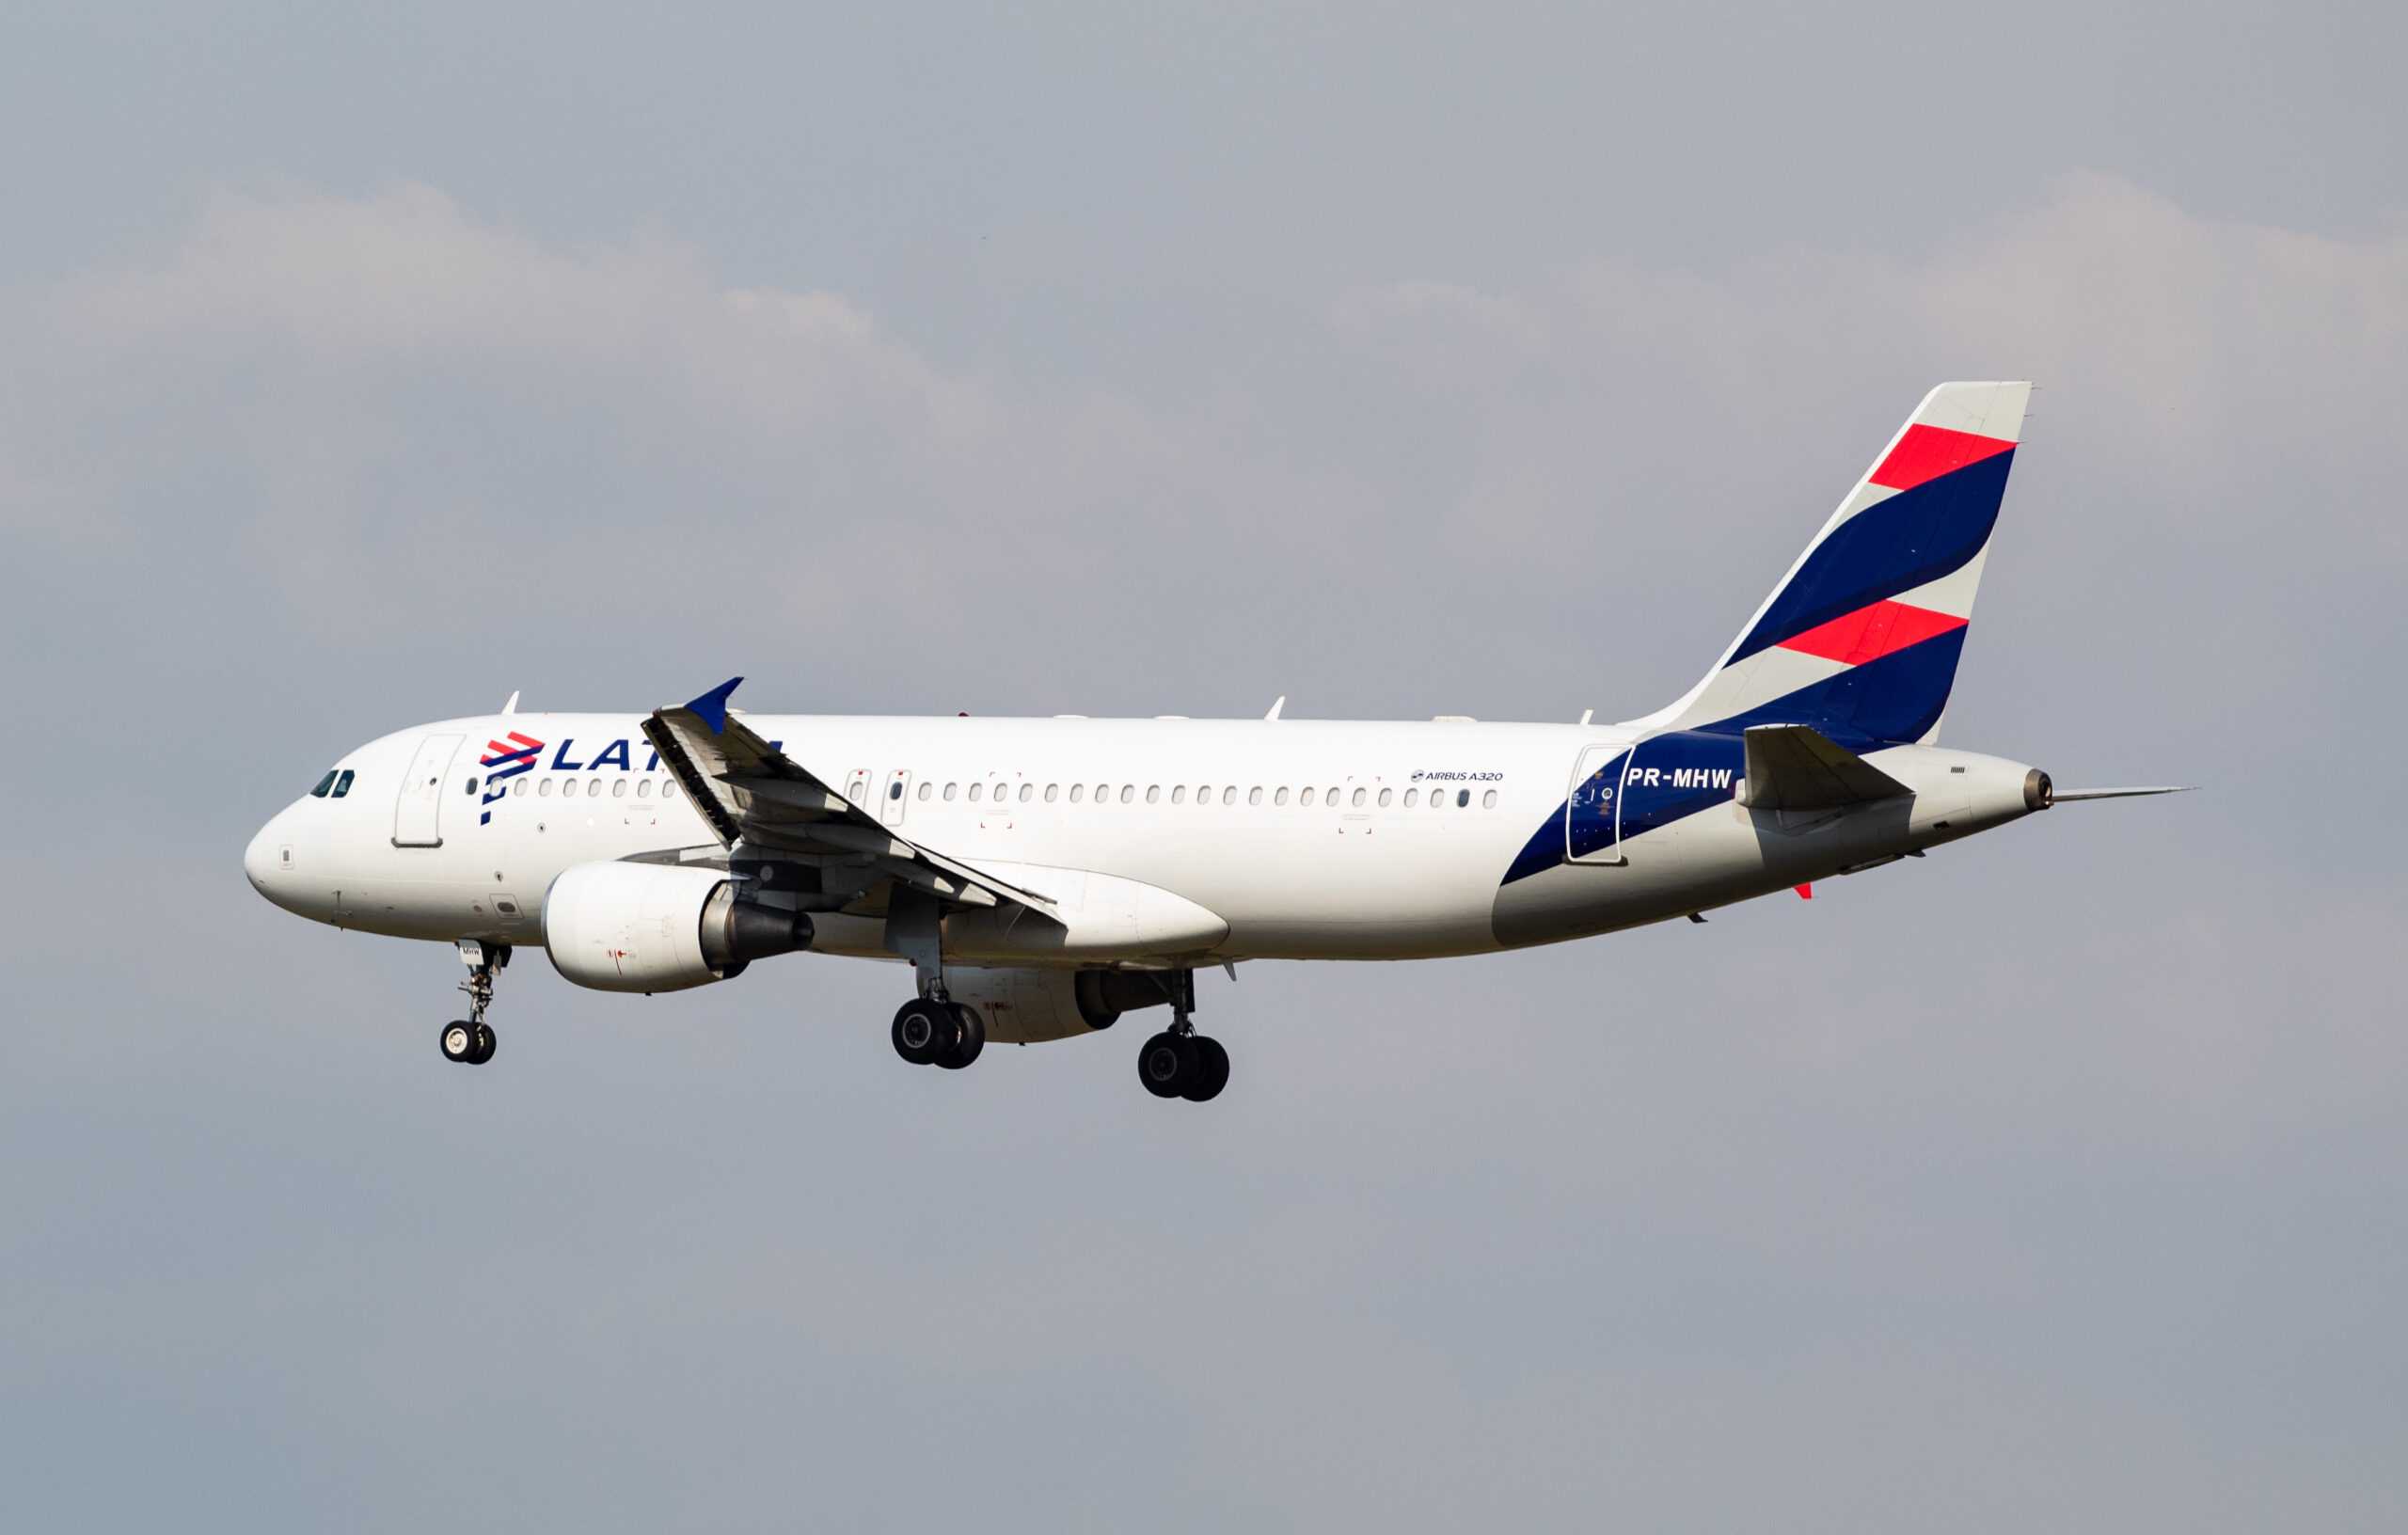 PR-MHW - Airbus A320-214 - LATAM Airlines - Blog do Spotter